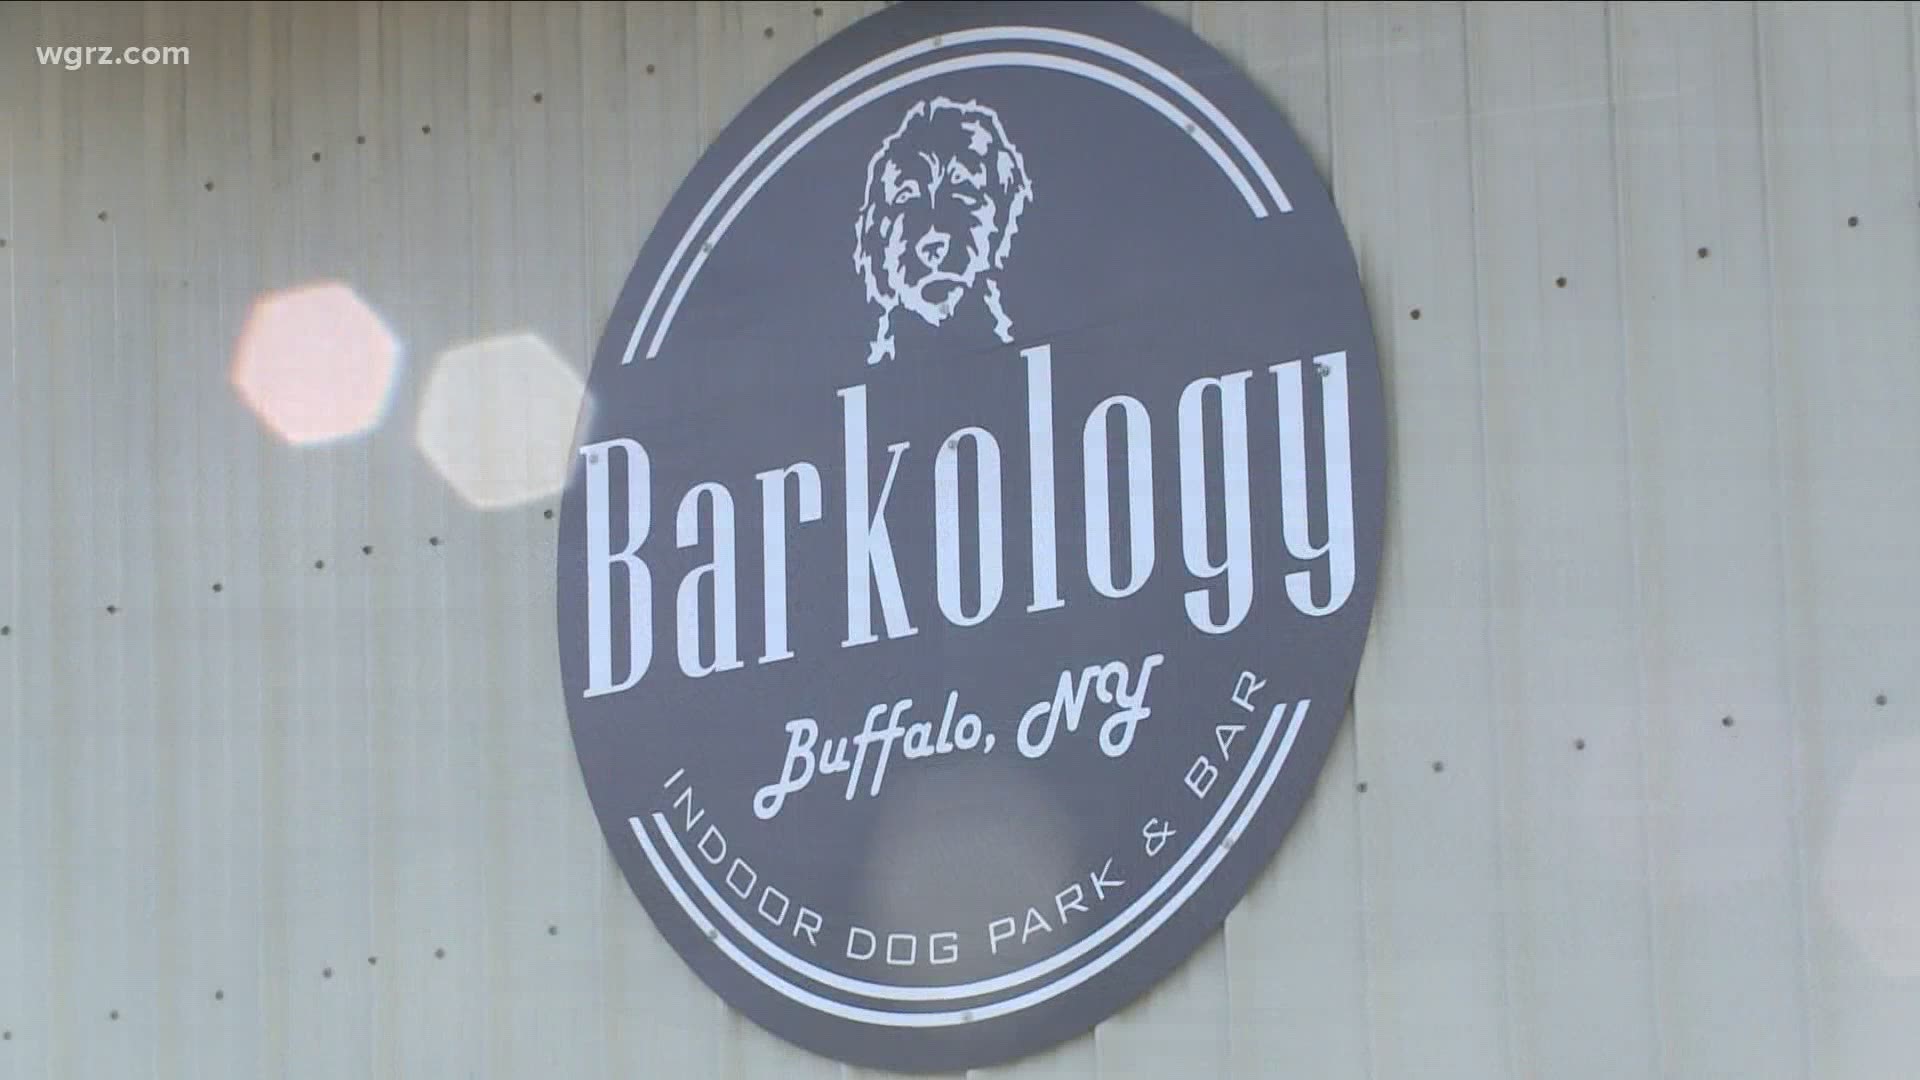 Barkology dog park and bar to open in Cheektowaga making it the first-of-its-kind spot in WNY.